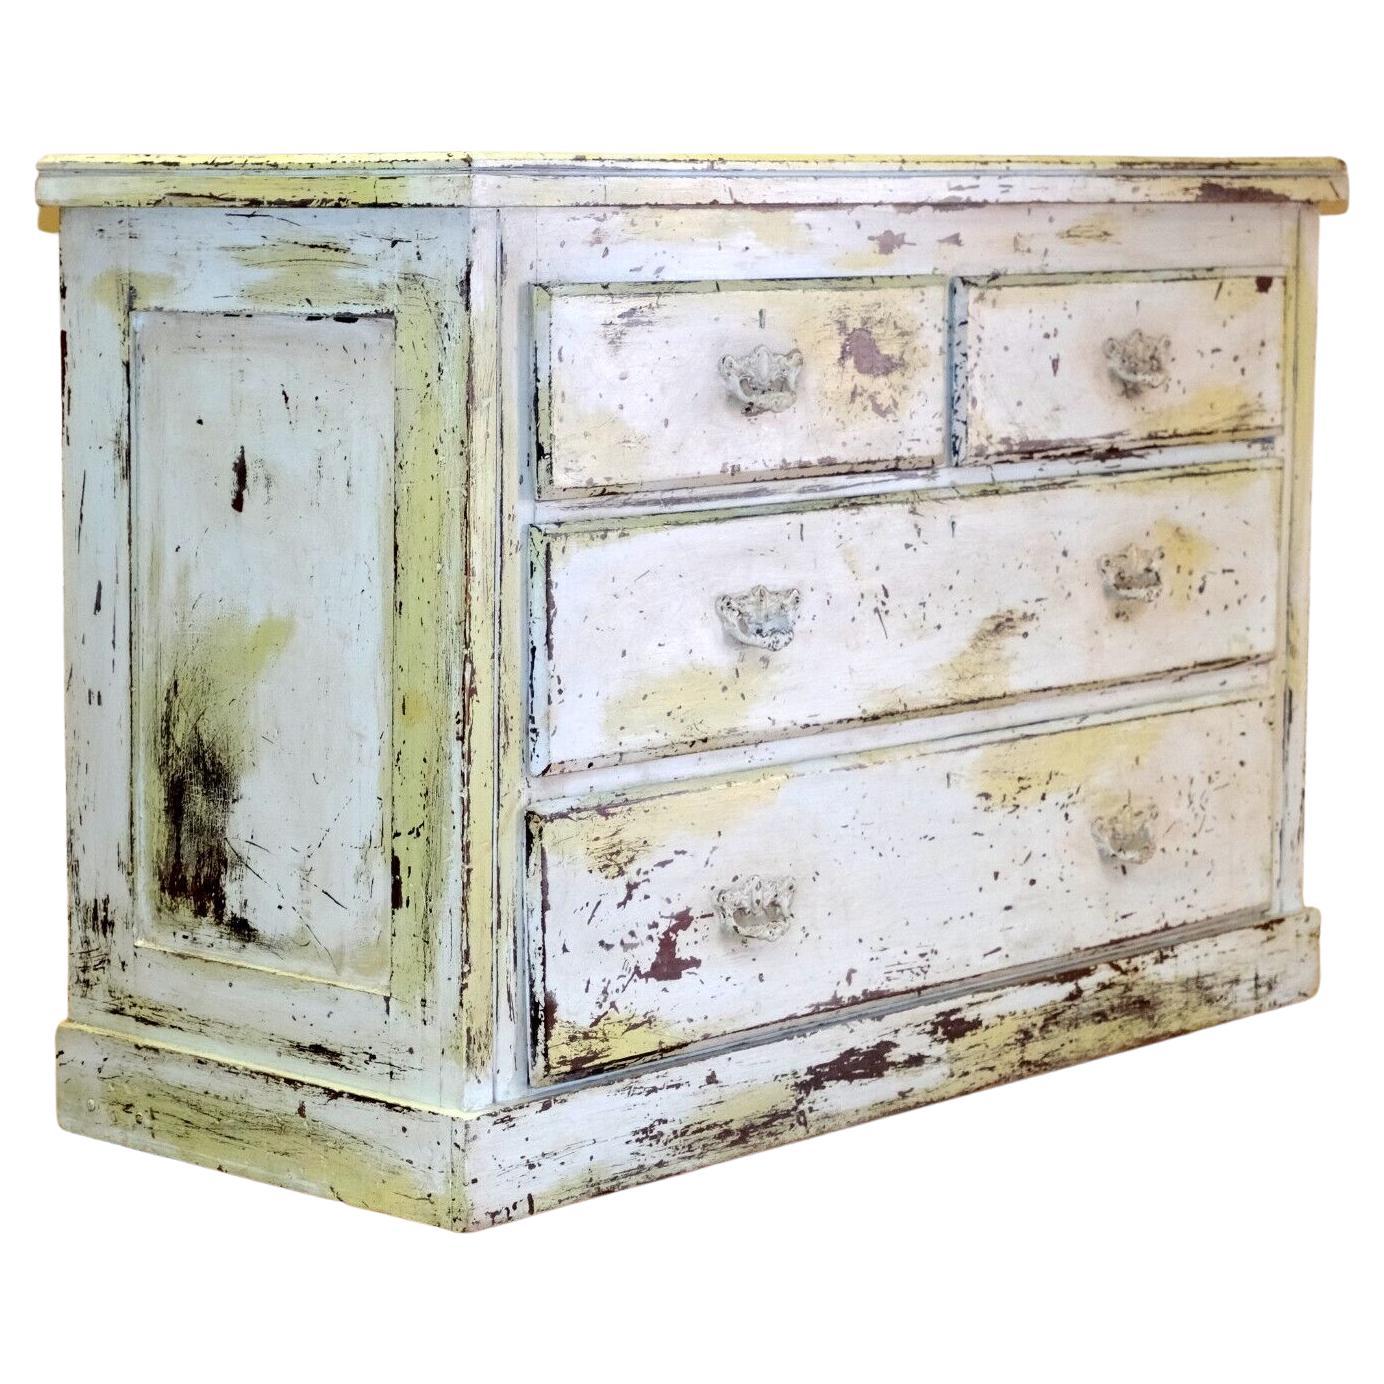 CHARMING LiME GREEN RUSTIC ANTIQUE VICTORIAN PINE CHEST OF DRAWERS For Sale